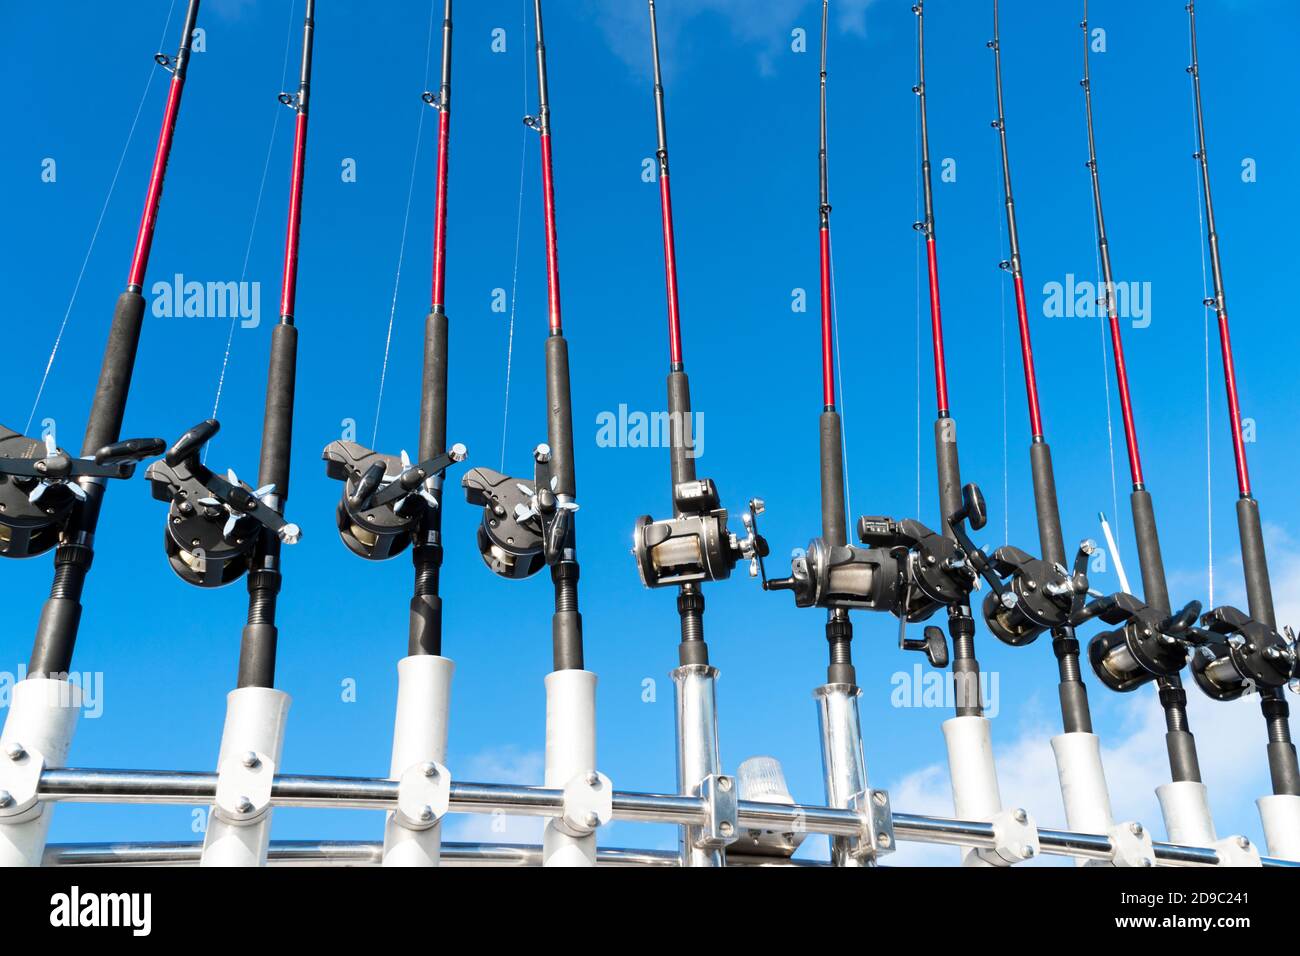 https://c8.alamy.com/comp/2D9C241/fishing-trolling-boat-rods-in-rod-holder-big-game-fishing-fishing-reels-and-rods-pattern-on-boat-sea-fishing-rods-and-reels-in-a-row-2D9C241.jpg